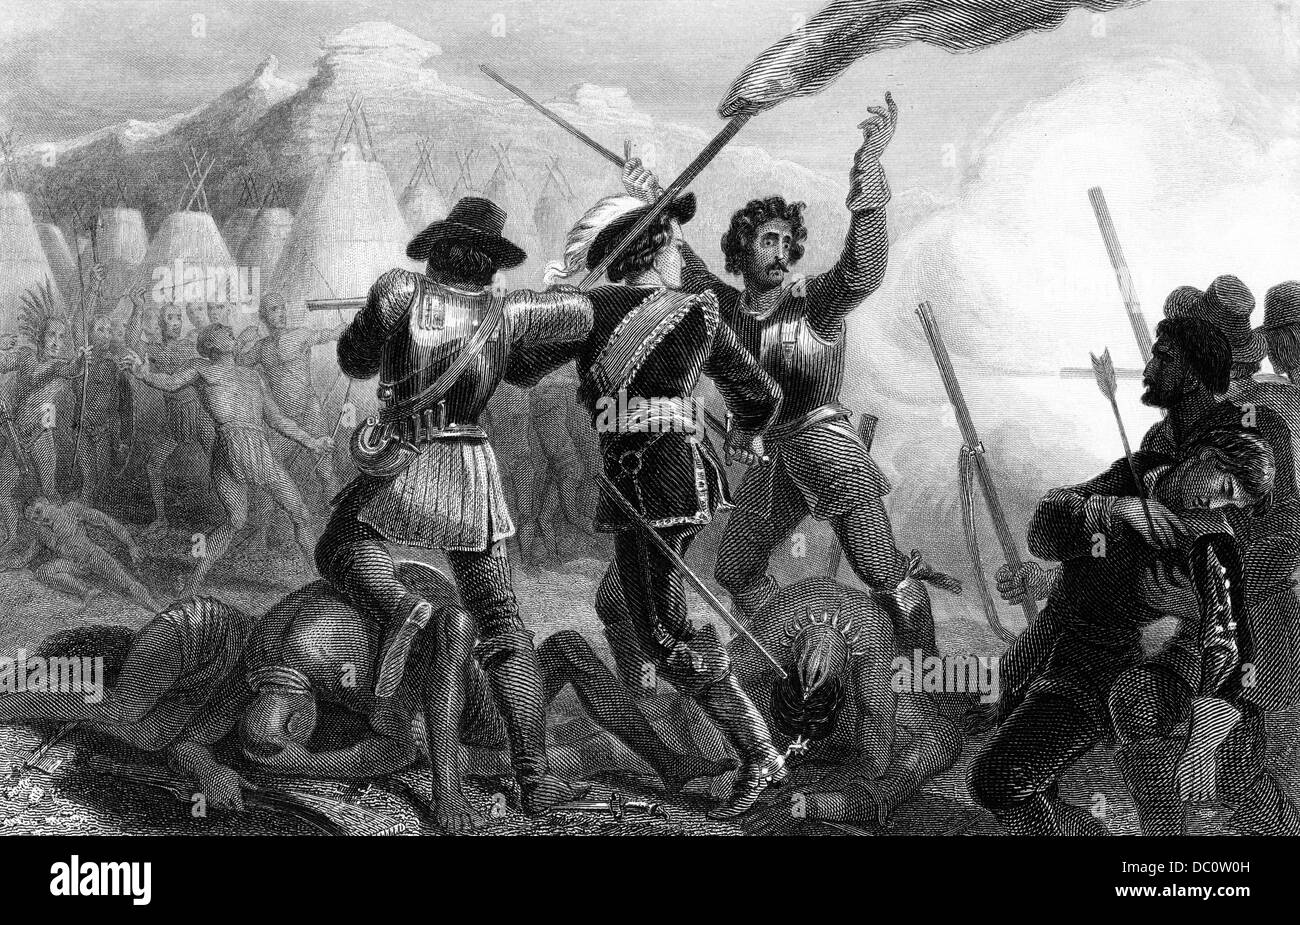 1600s 1630s 1637 BATTLE OF THE PEQUOT WAR PURITAN SETTLERS FIGHTING PEQUOT INDIANS IN CONNECTICUT USA Stock Photo